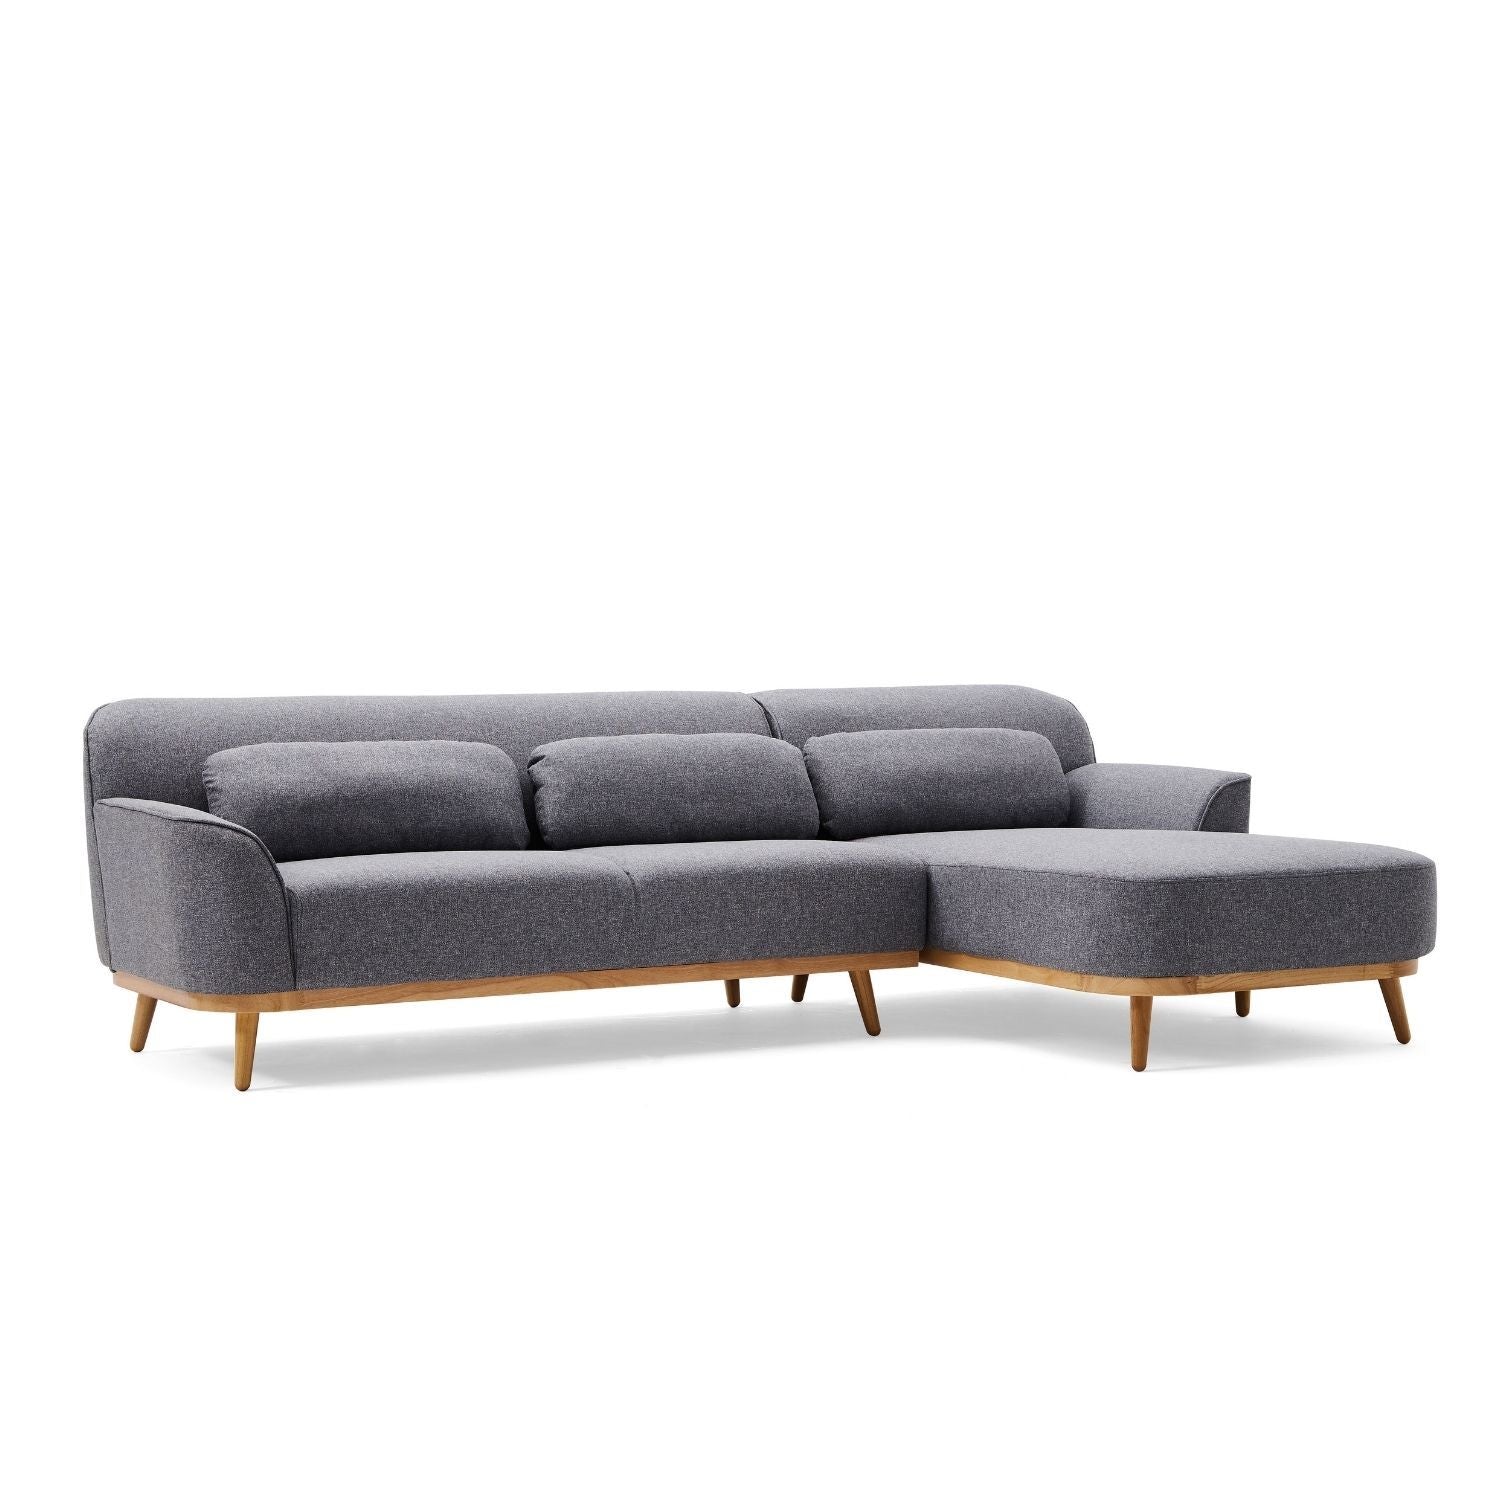 Solid Wood Sectional Sofa Valyou Furniture 